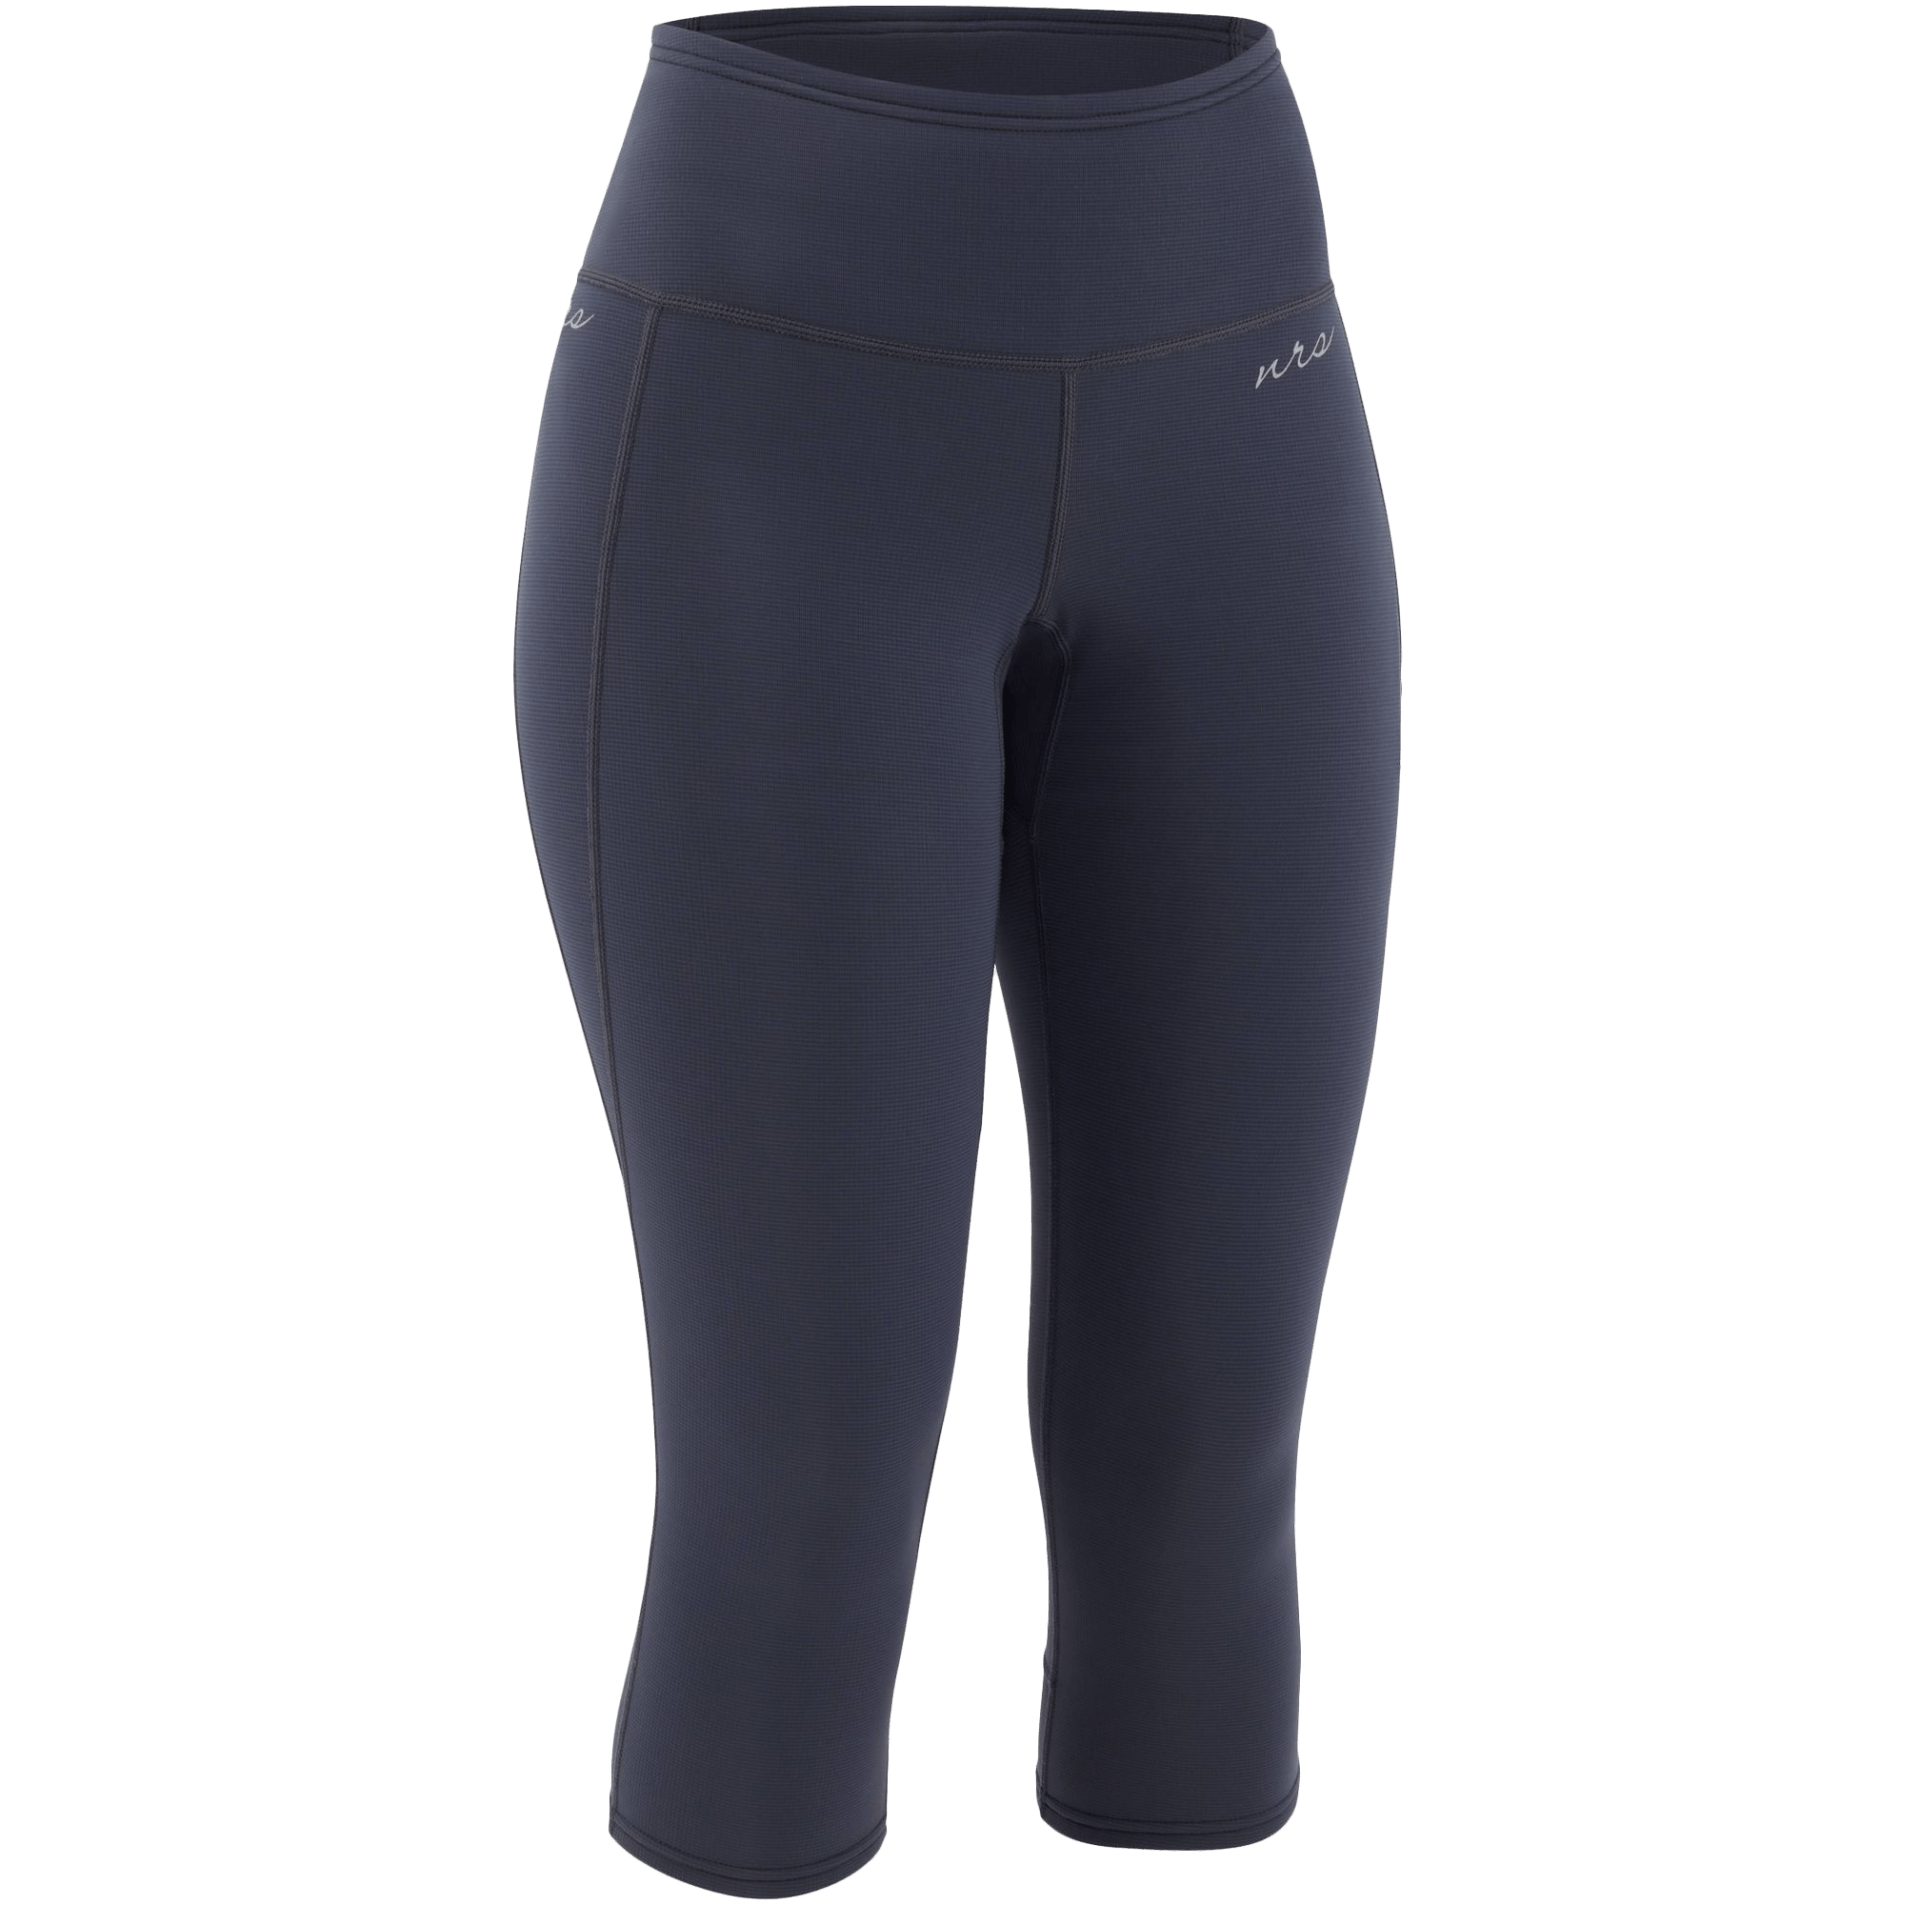 nrs_womens_hydroskin_05mm_capris_right_angle.png